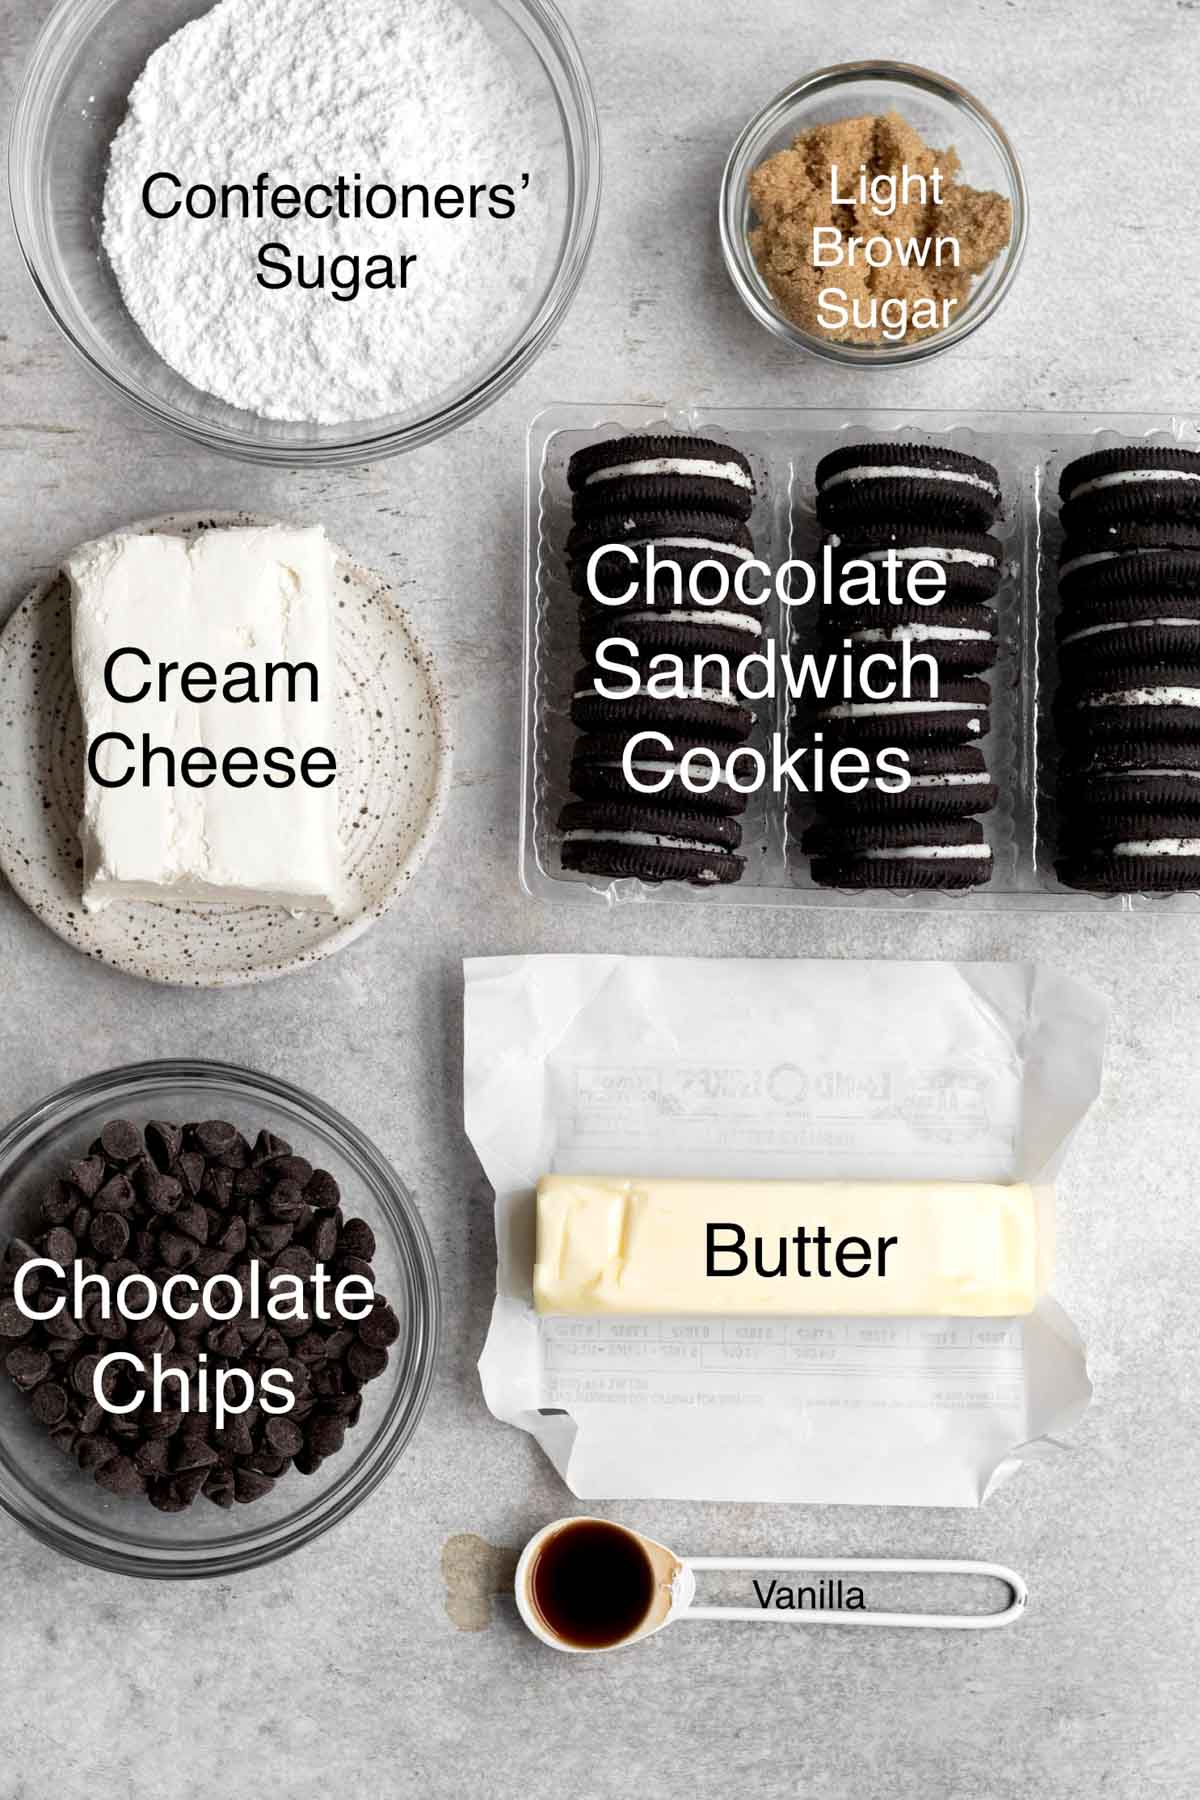 Confectioners' sugar, light brown sugar, cream cheese, chocolate sandwich cookies, chocolate chips, butter and vanilla in separate containers.